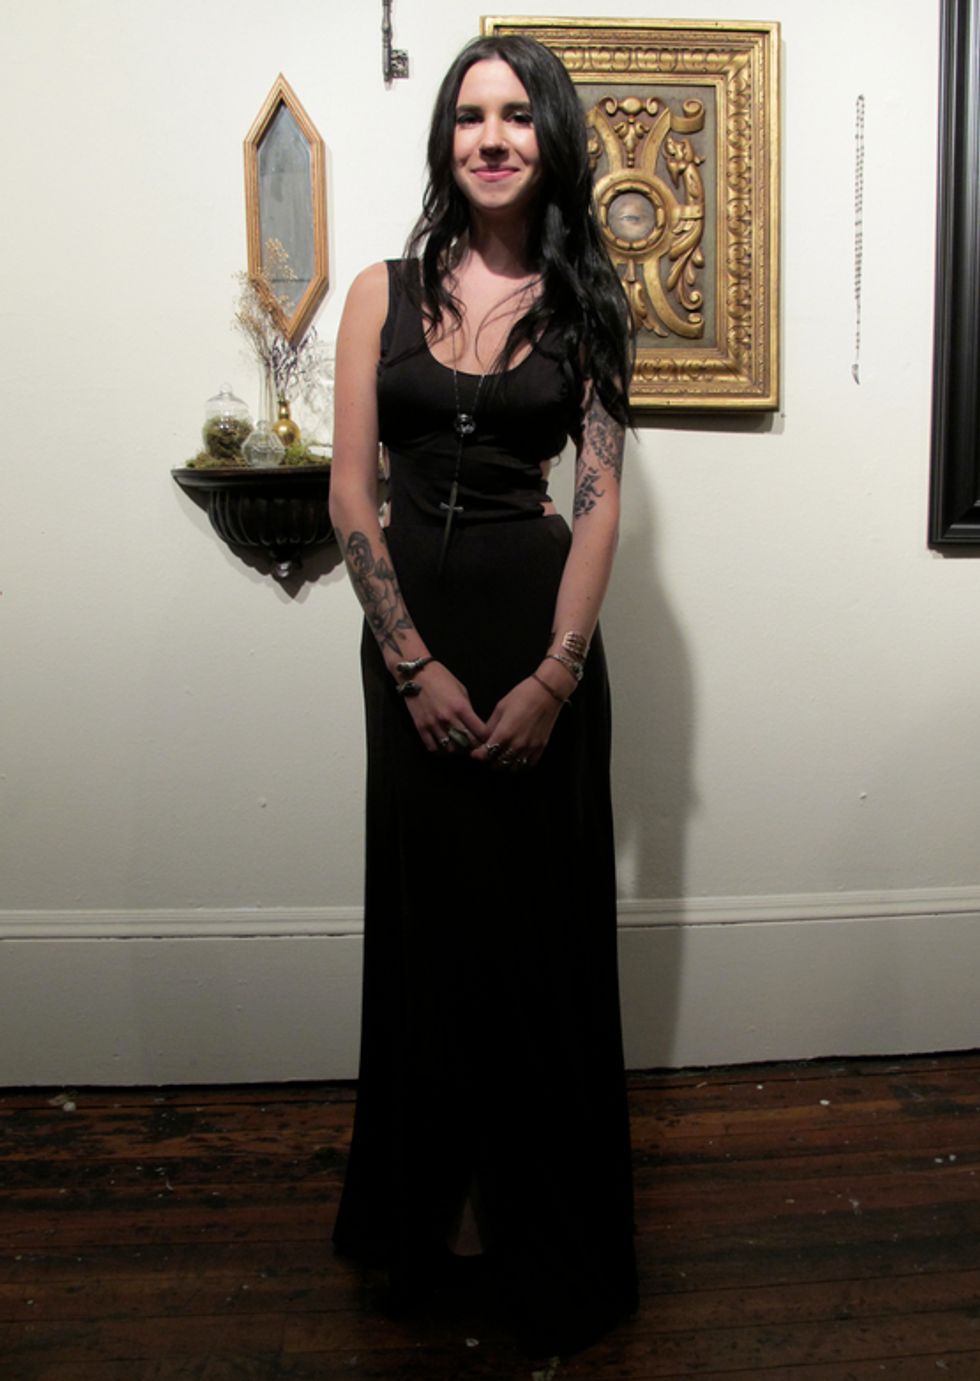 SF Street Style: Local Artist Charmaine Olivia, Dressed in Black, at The Shooting Gallery